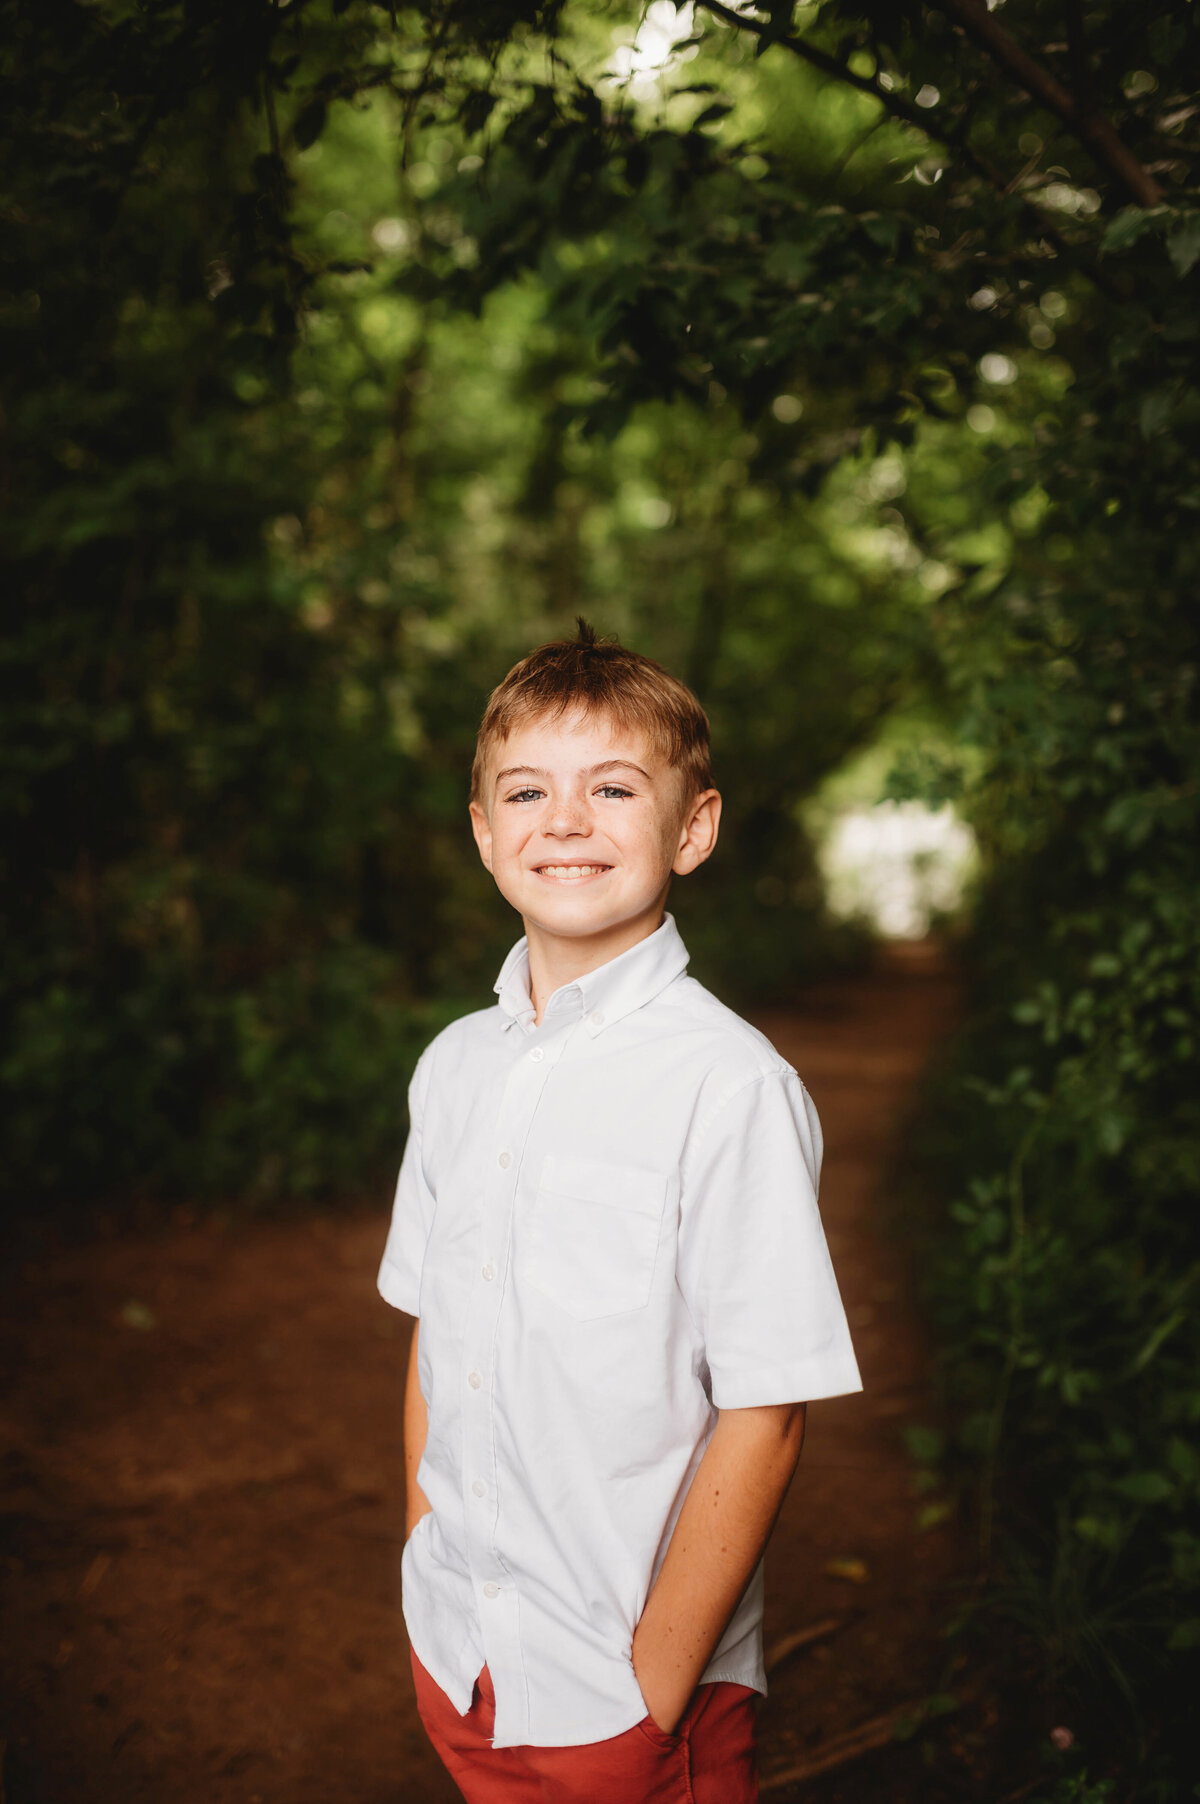 Child poses for Portraits during an Extended Family Photoshoot in Asheville, NC.